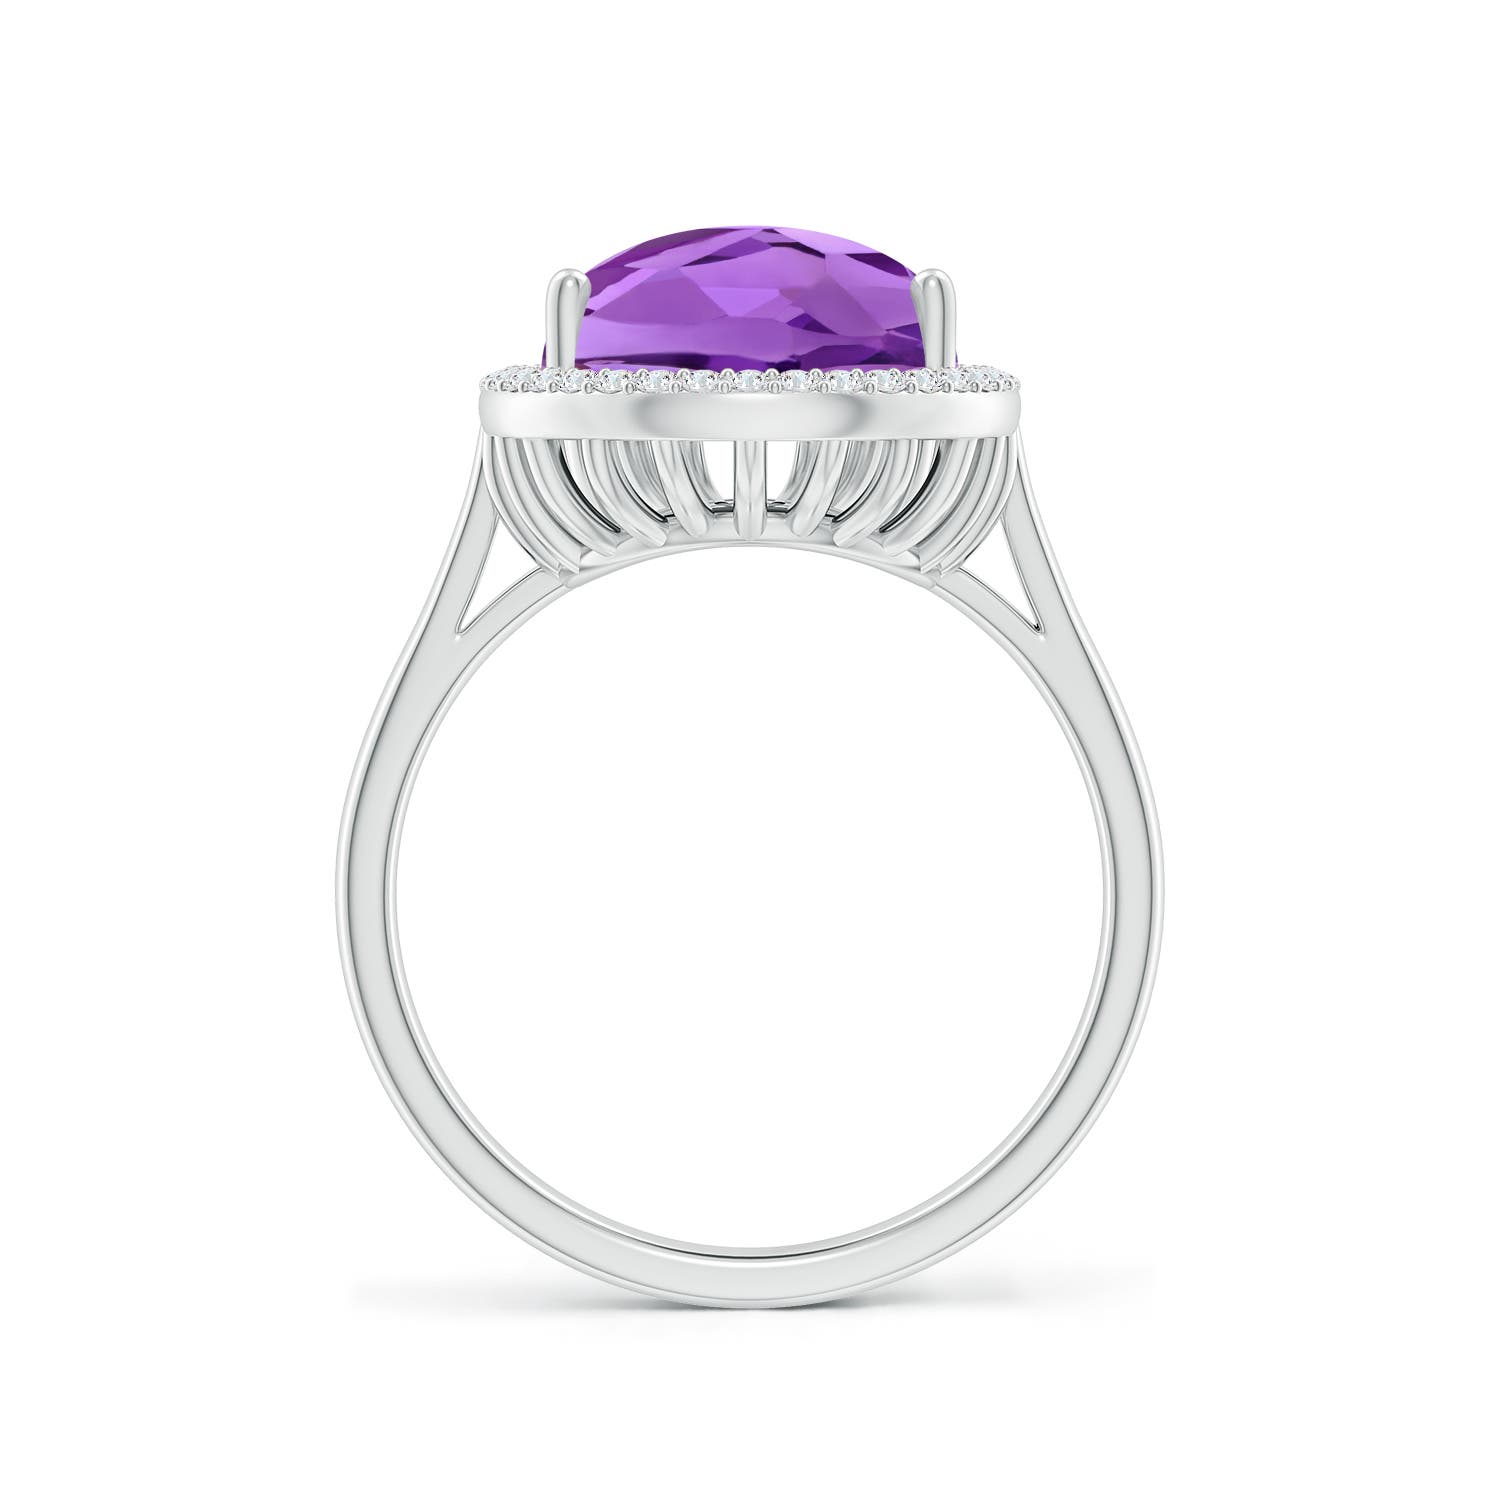 AAA - Amethyst / 5.1 CT / 14 KT White Gold